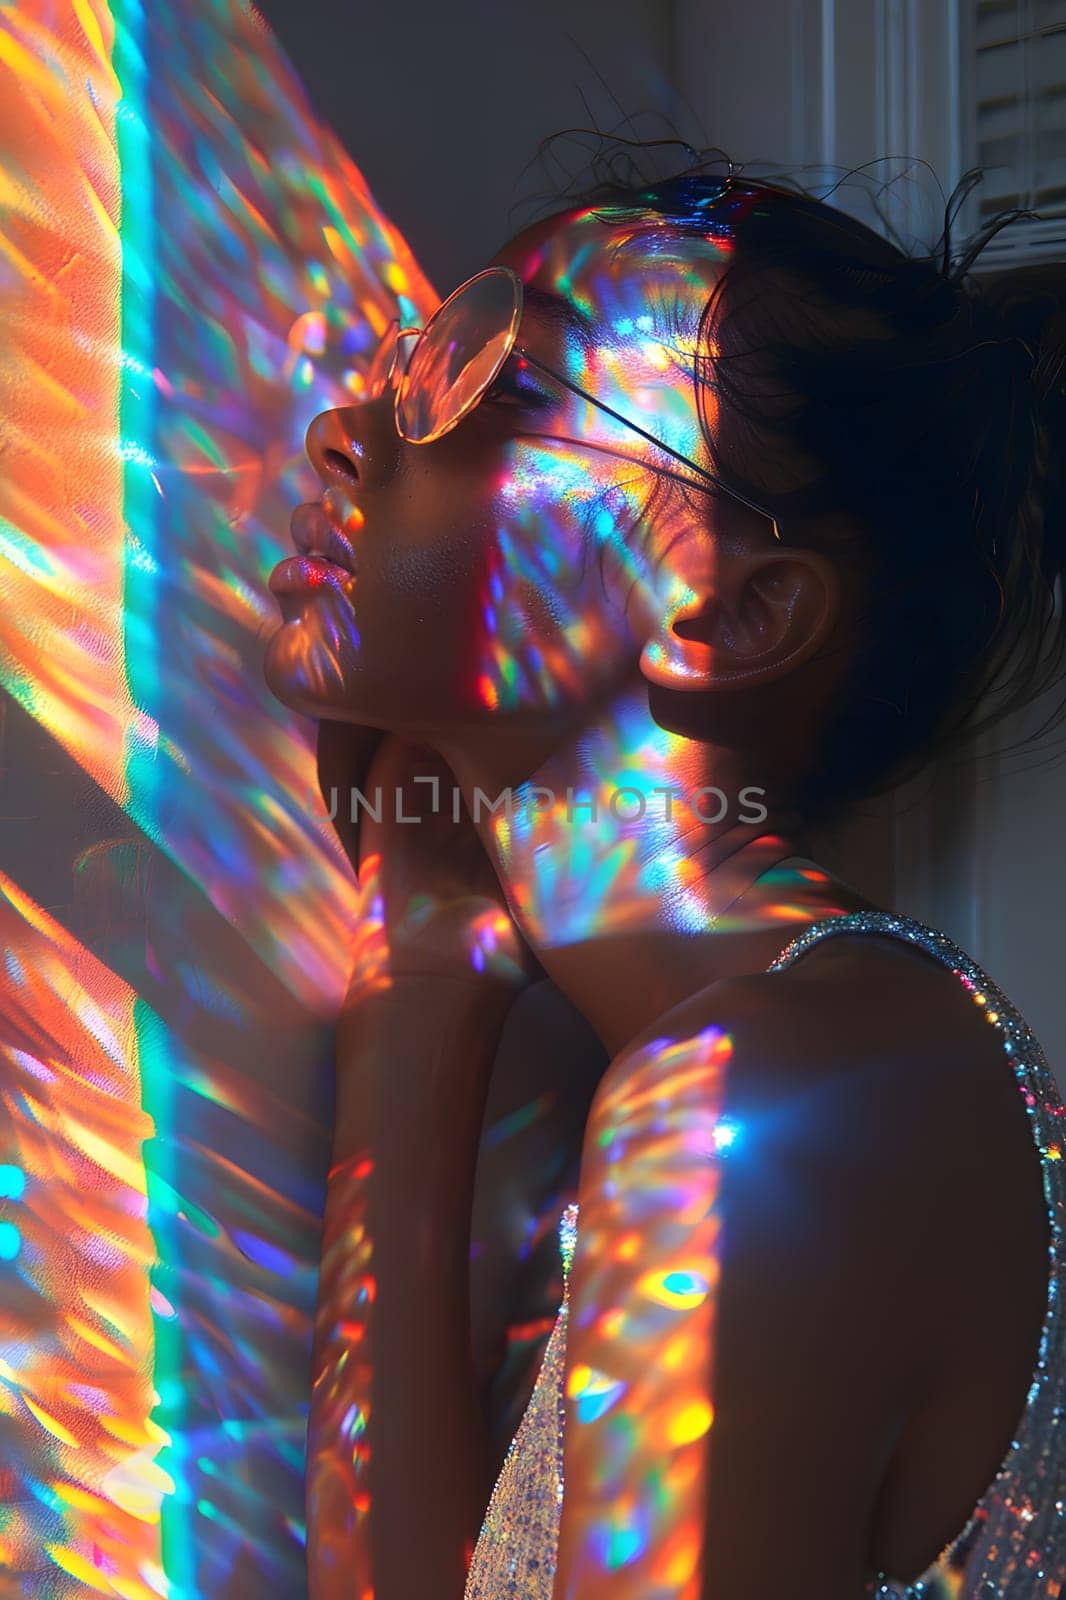 A woman stands by a window with a rainbow reflection on her face, showcasing the beauty of light and glass patterns in a dark room